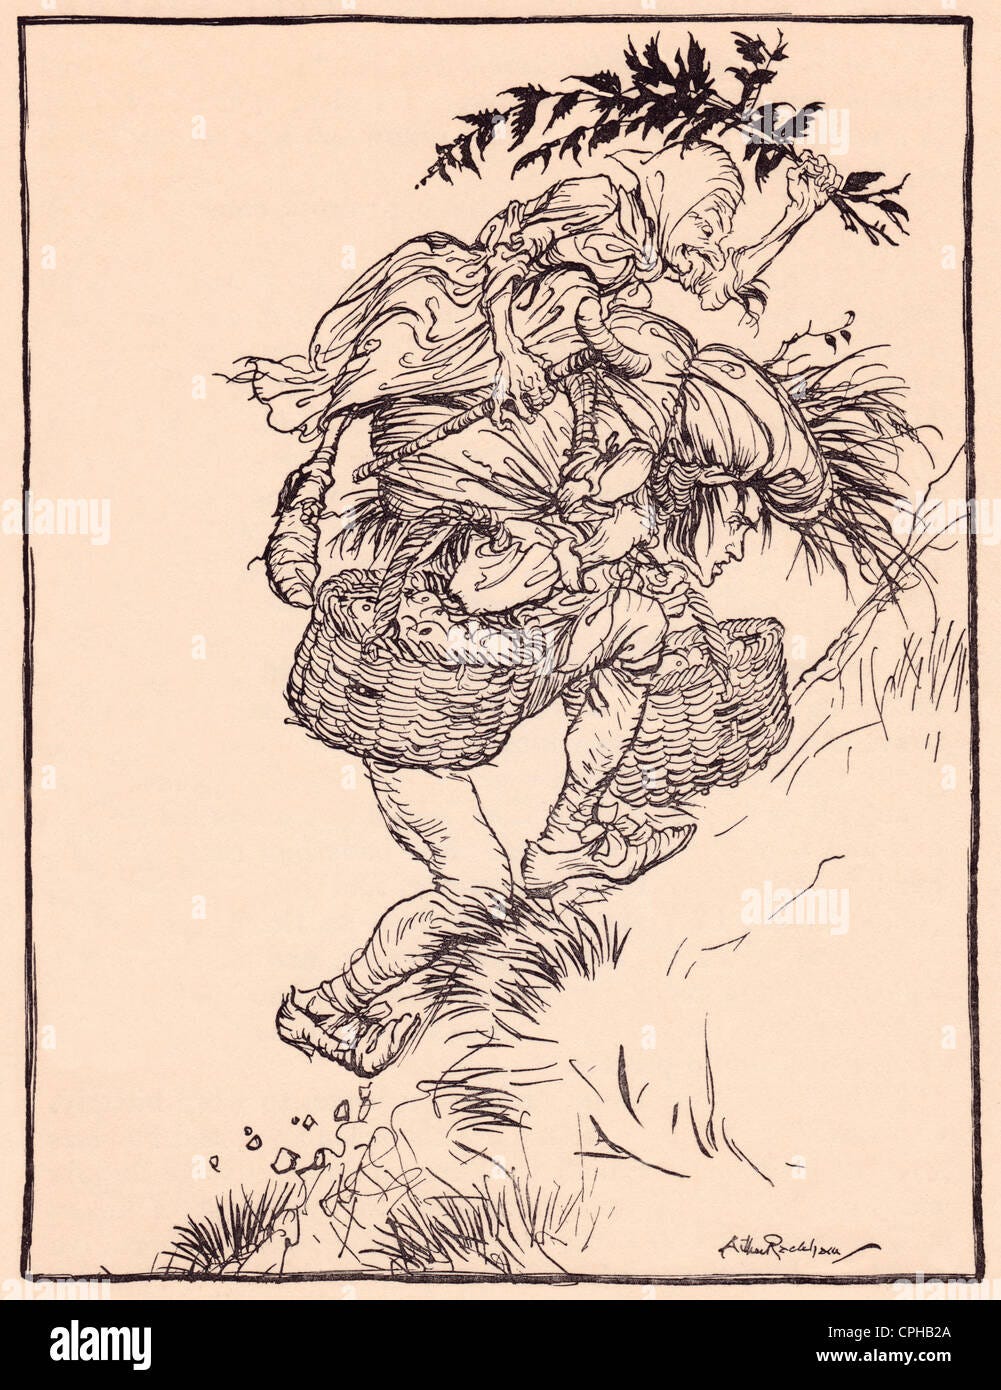 Illustration by Arthur Rackham from Grimm's Fairy Tale, The Goose Girl at the  Well Stock Photo - Alamy